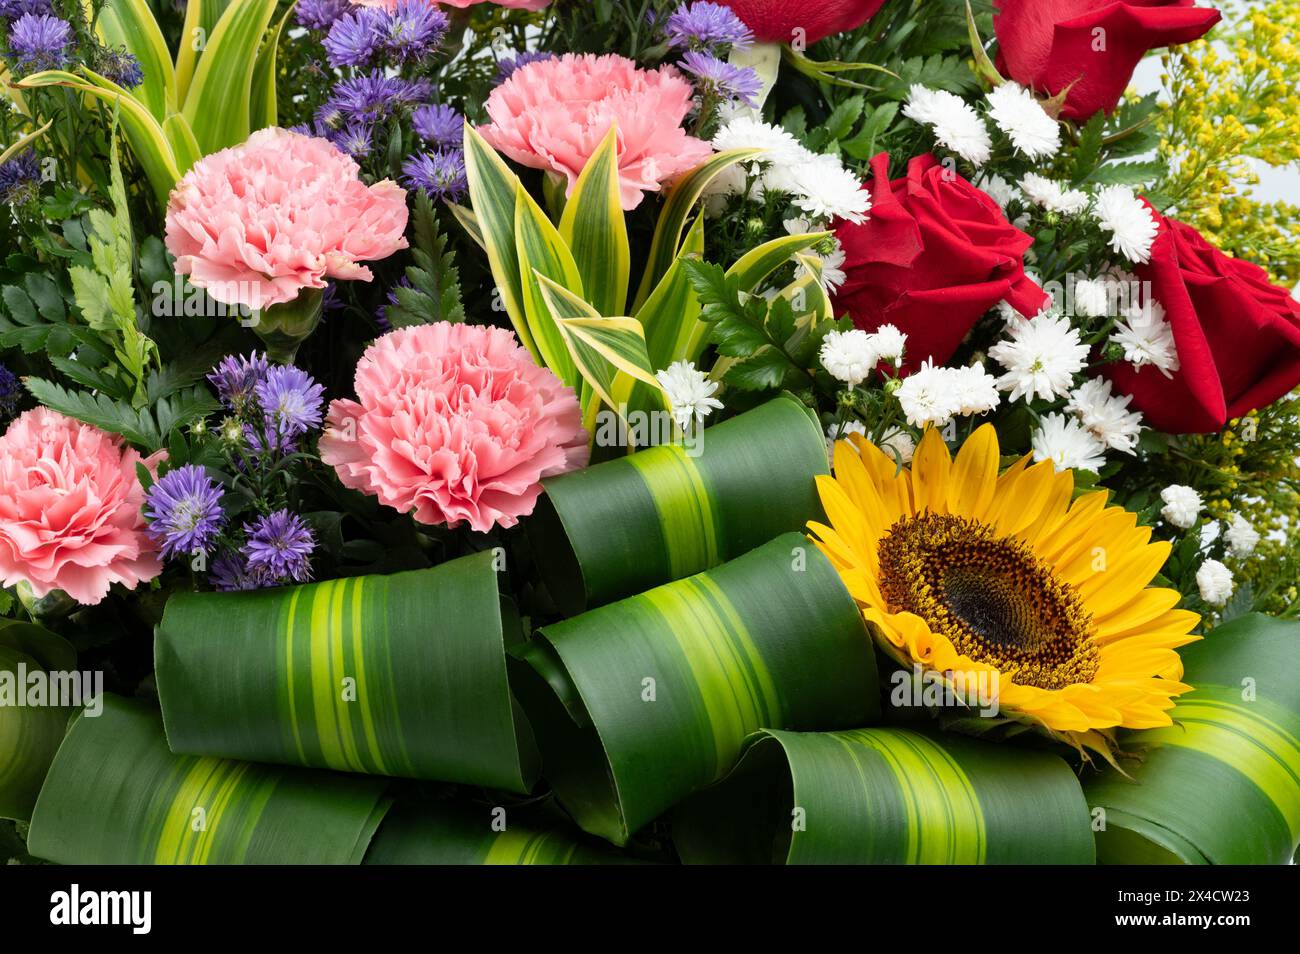 Blossom of colorful flowers in big bouquet with green leaves Stock Photo